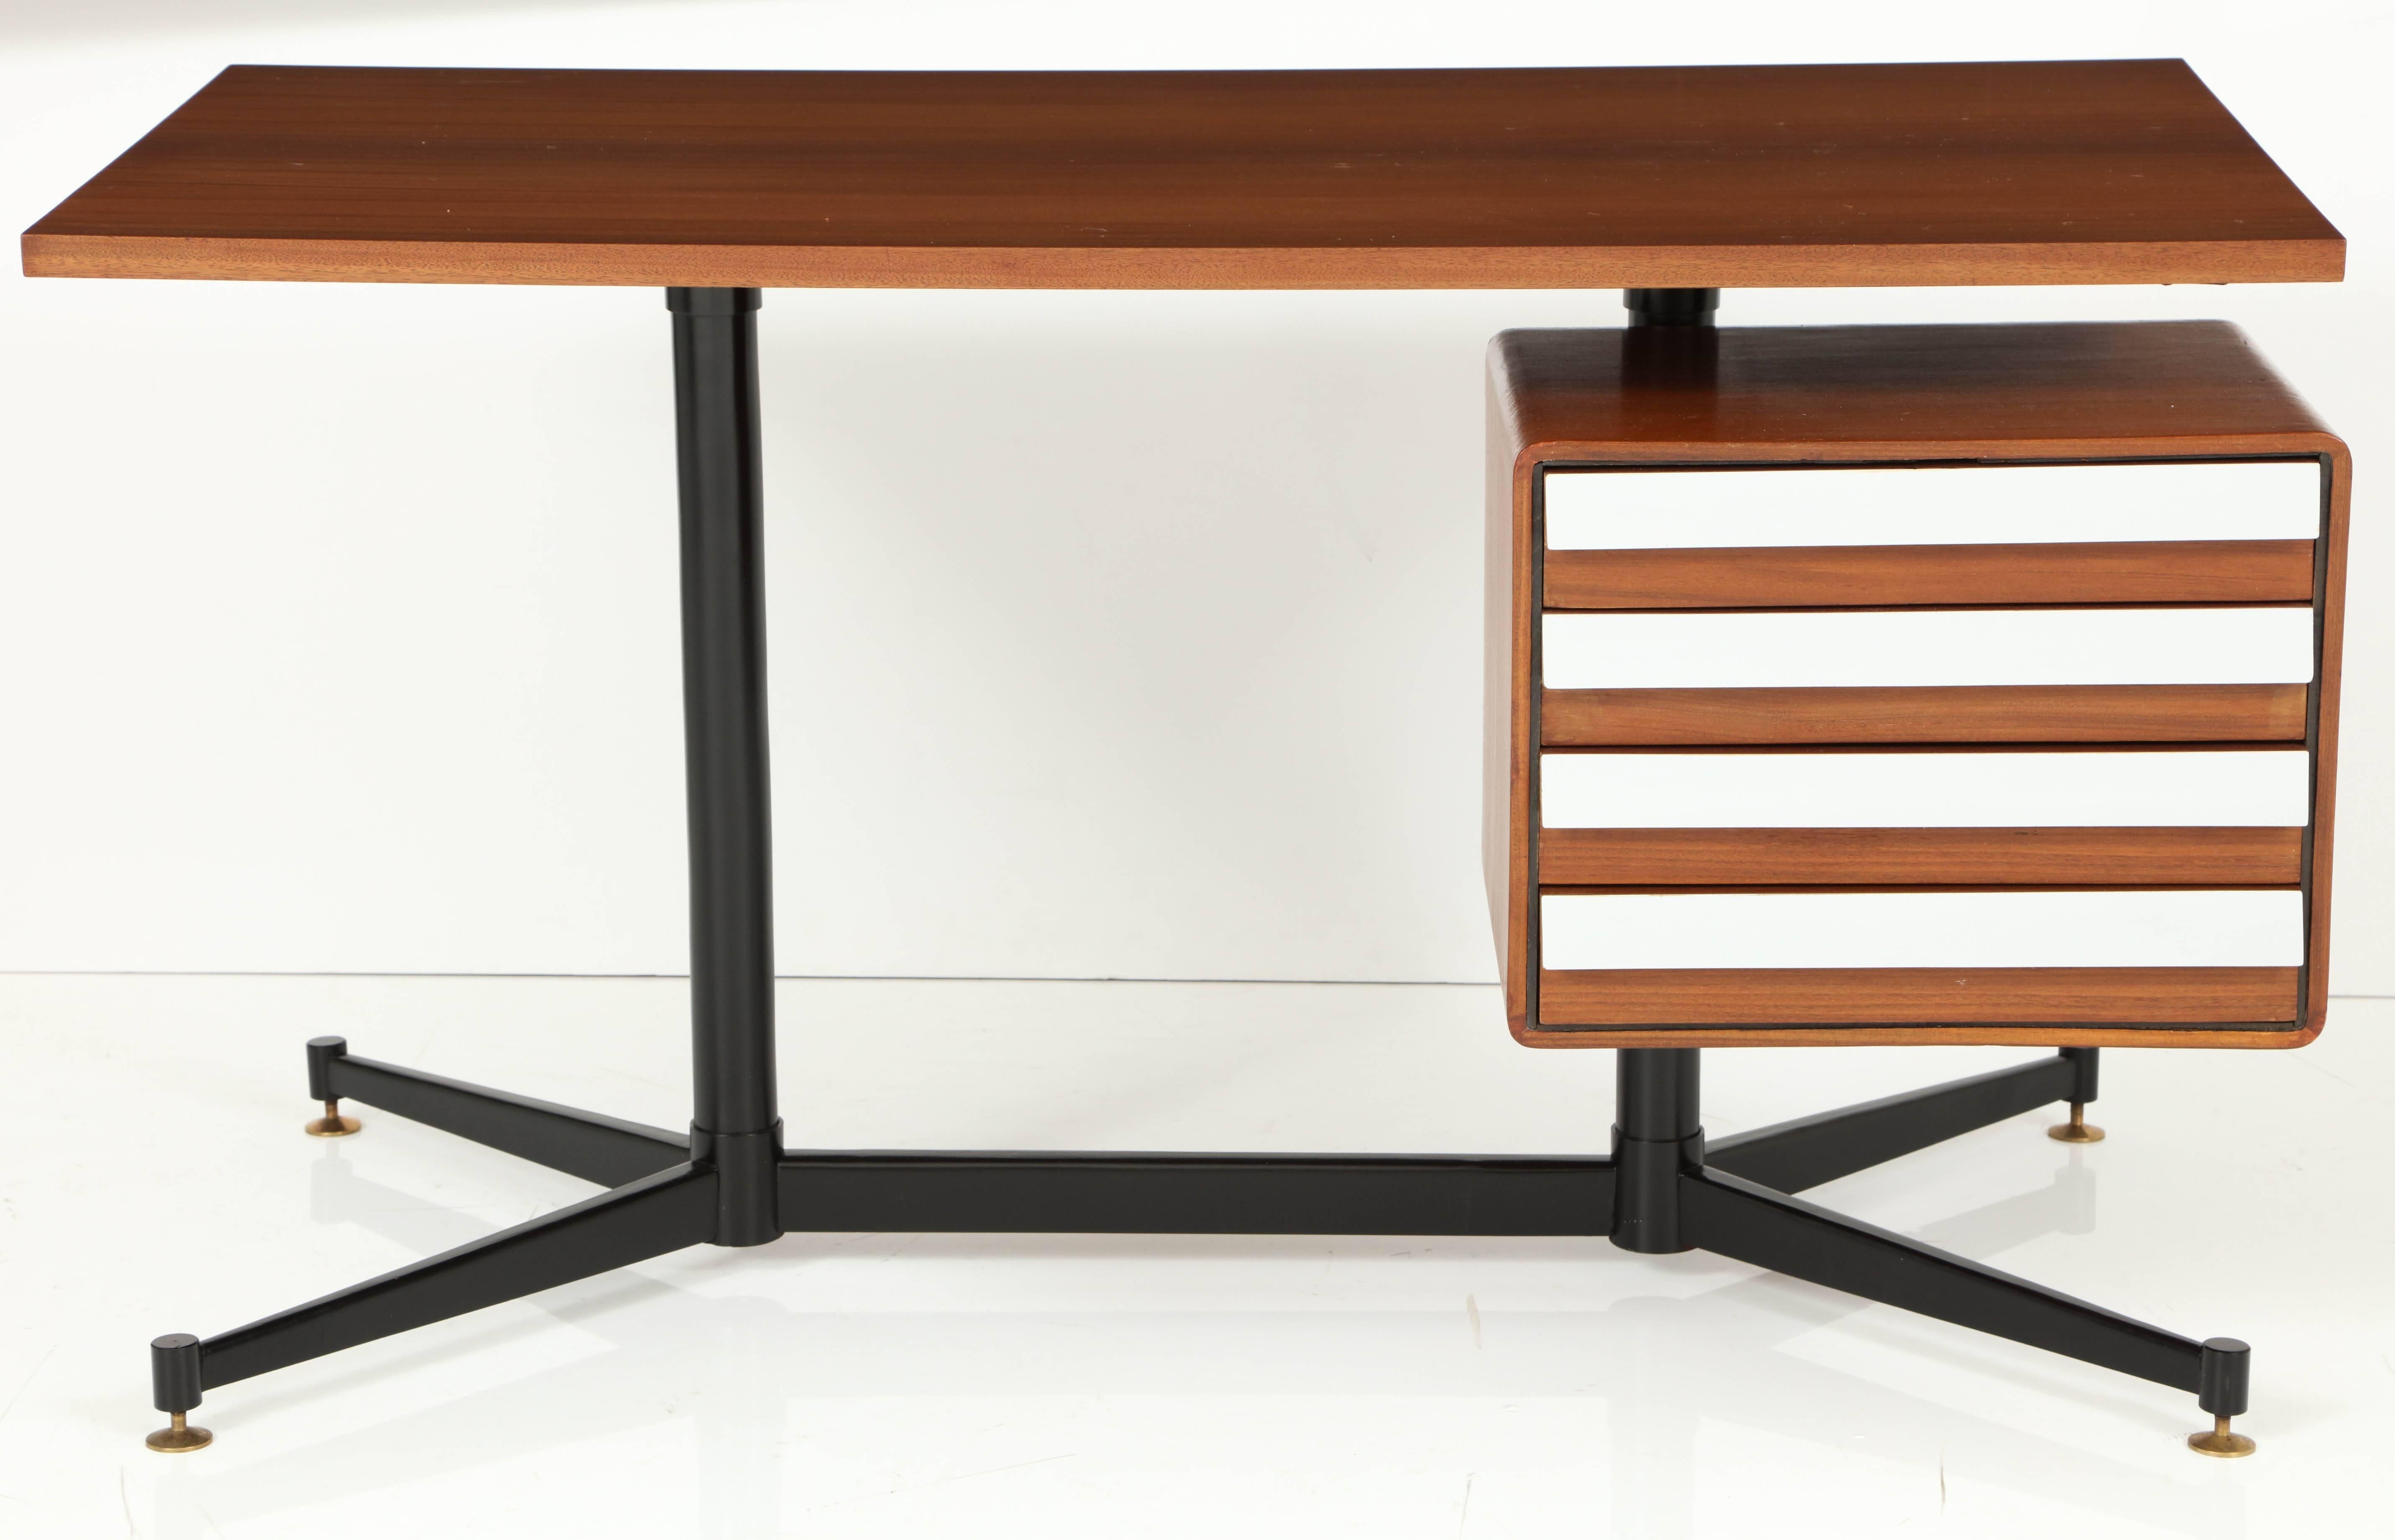 Small desk with heavy black lacquered metal frame and brass feet. The top is in rosewood and the drawer fronts have the original formica facing. This model is a similar design to that of Gio Ponti.